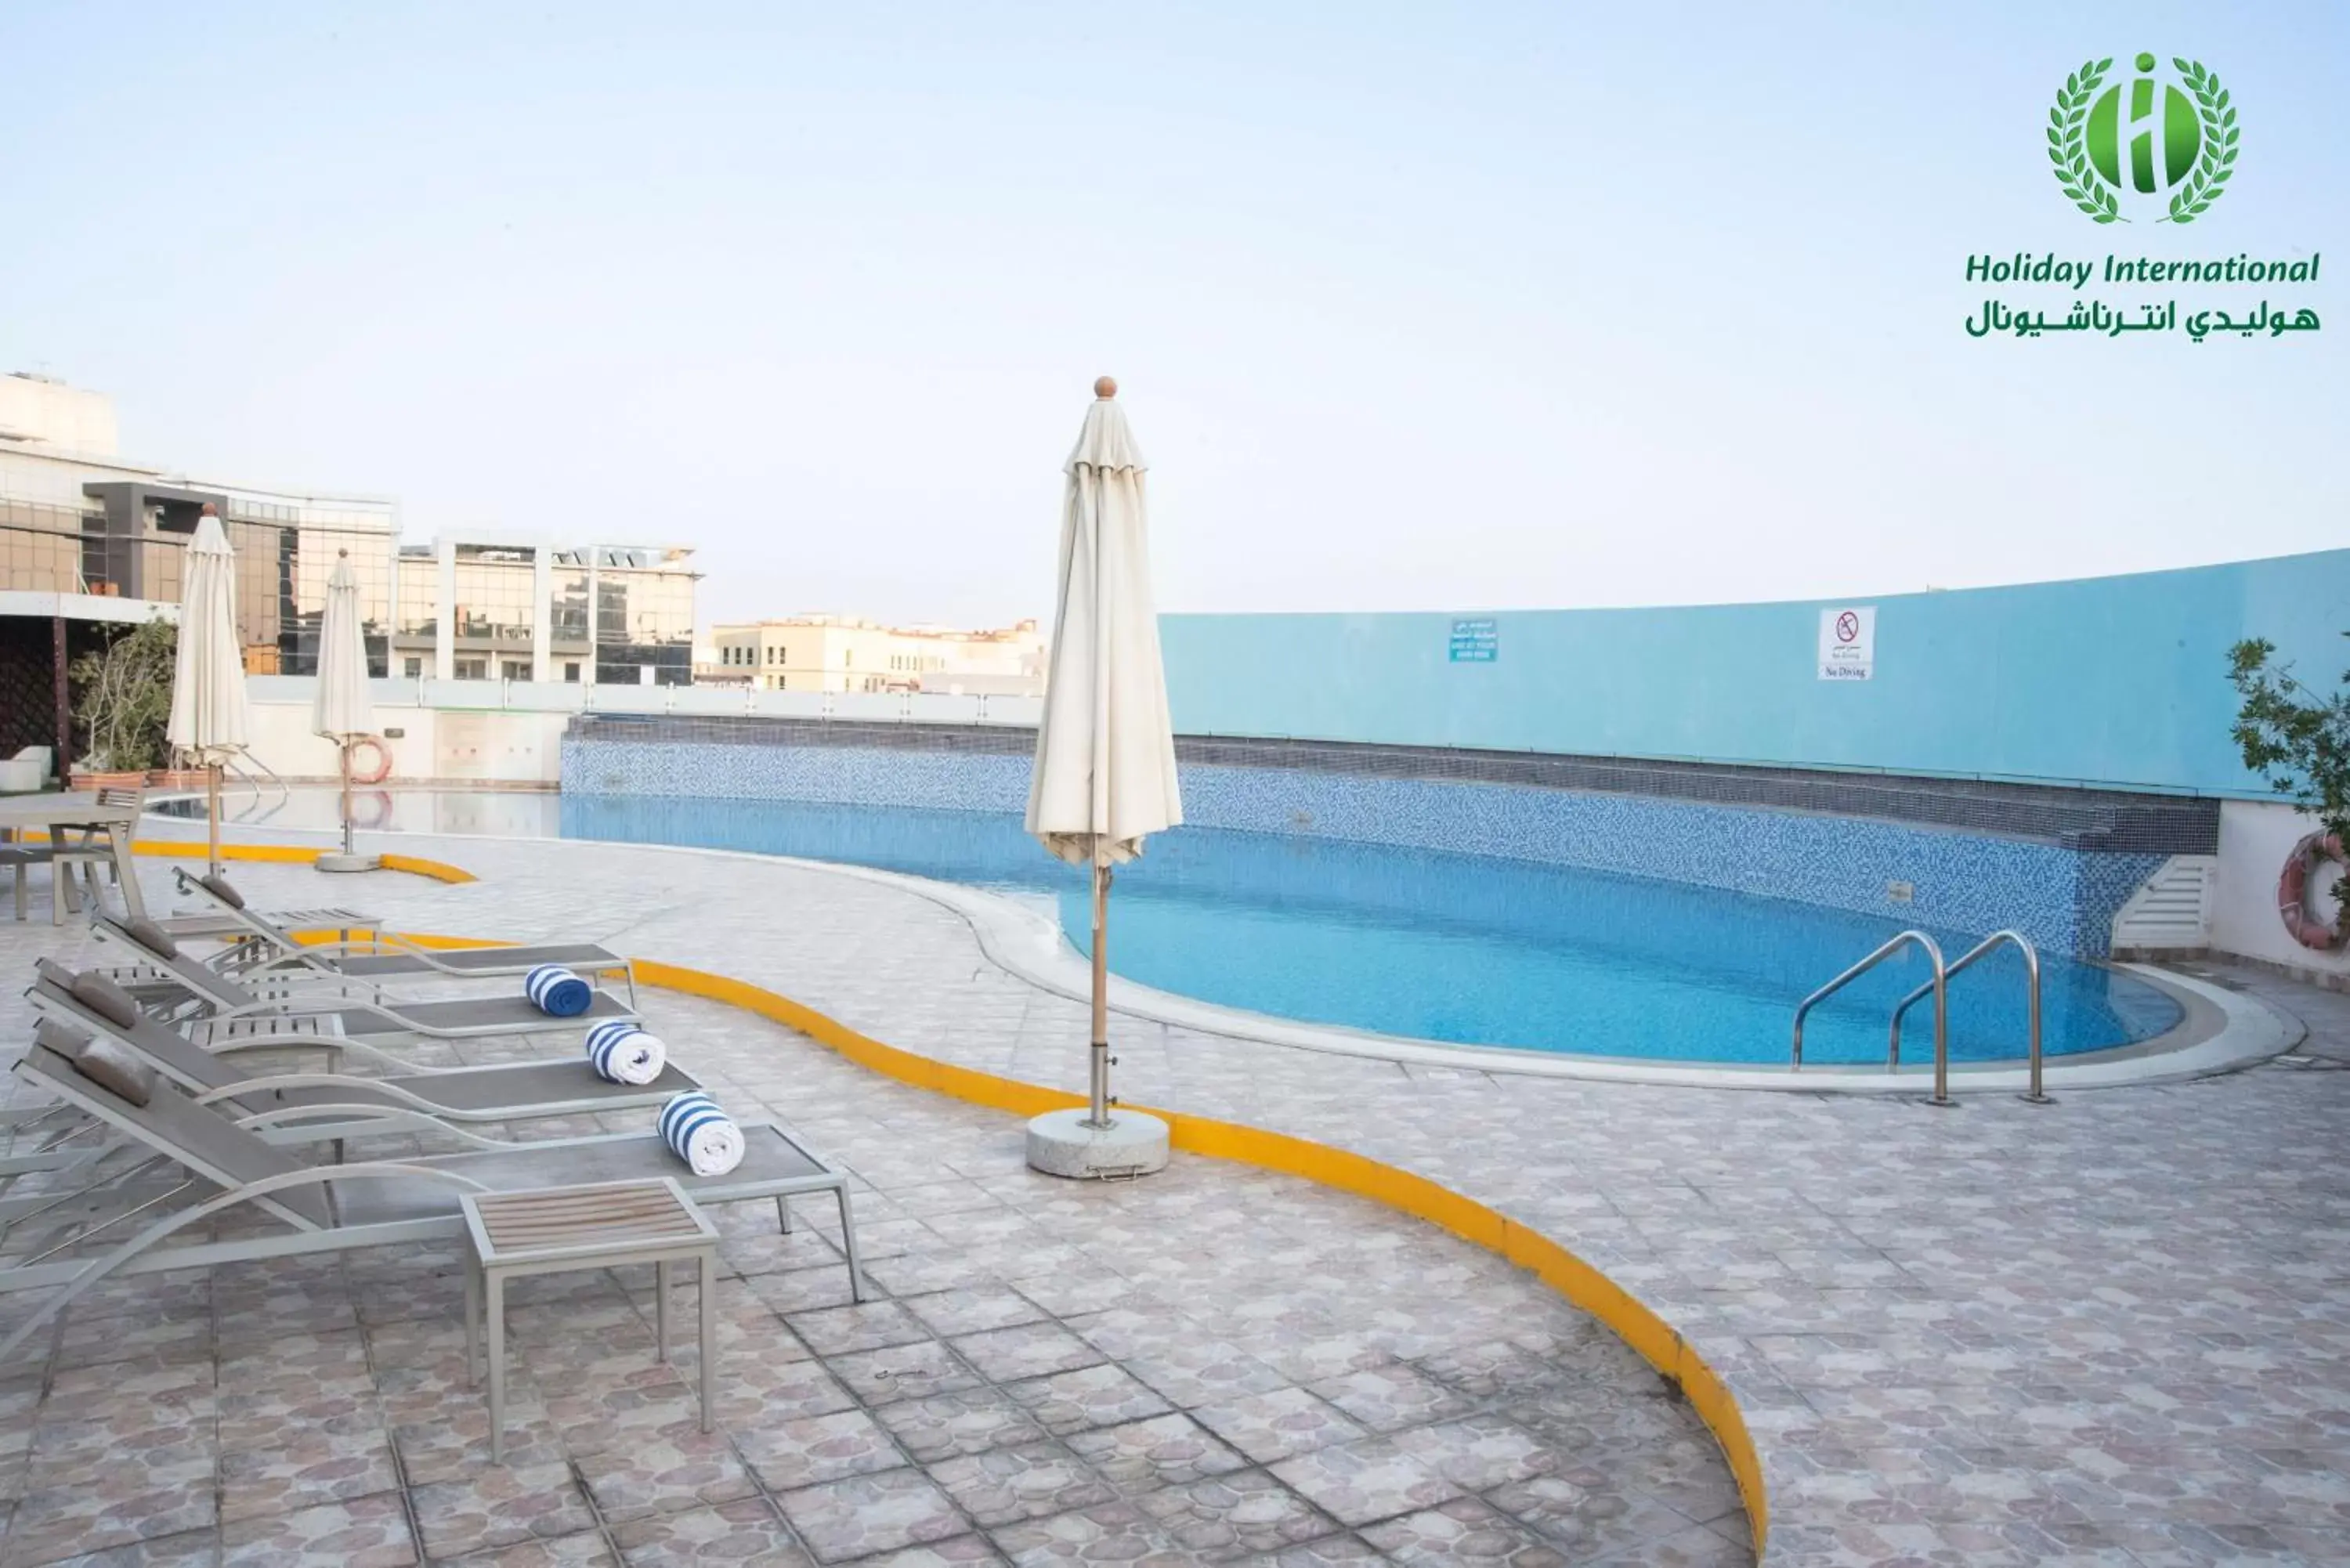 , Swimming Pool in Holiday International Hotel Embassy District